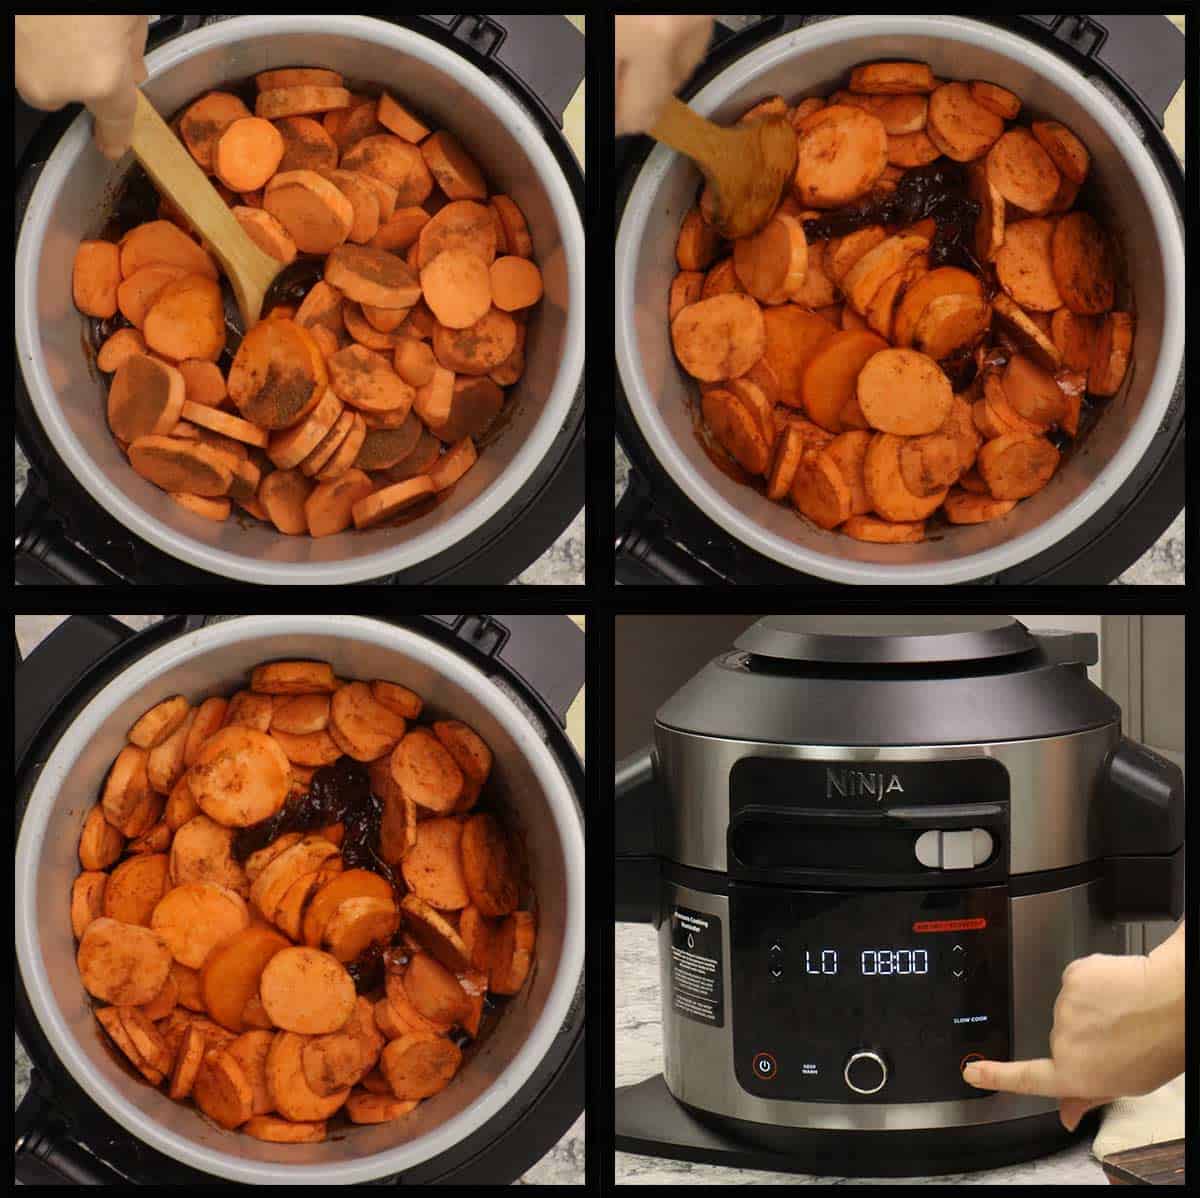 stirring the sweet potatoes before slow cooking.